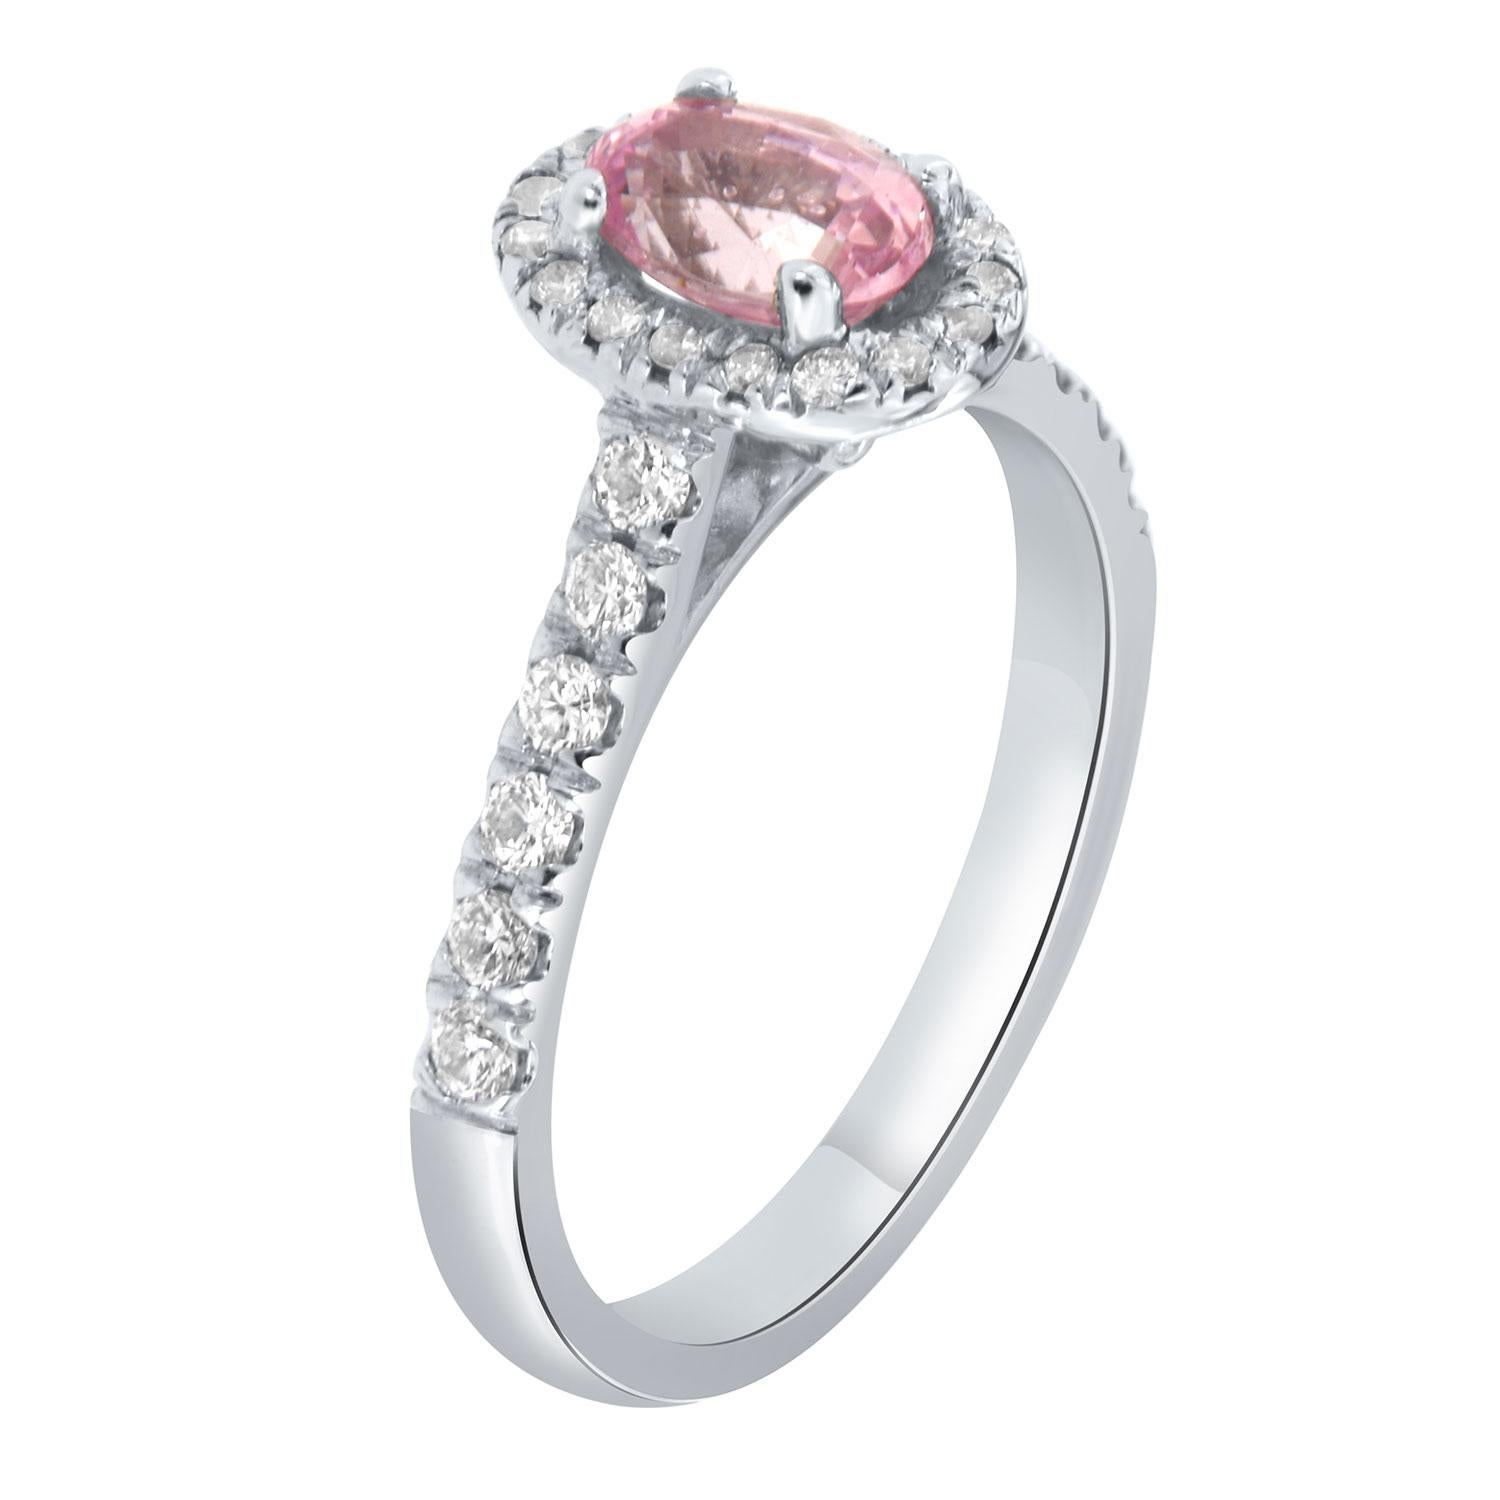 This Platinum ring features a none-heated 1.14 Carat round-shaped Natural Sapphire in vibrant Pink color with an excellent luster, encircled by a halo of brilliant round diamonds on a 2.5 mm wide diamond band. 
The diamond weight is 0.60 Carat. F